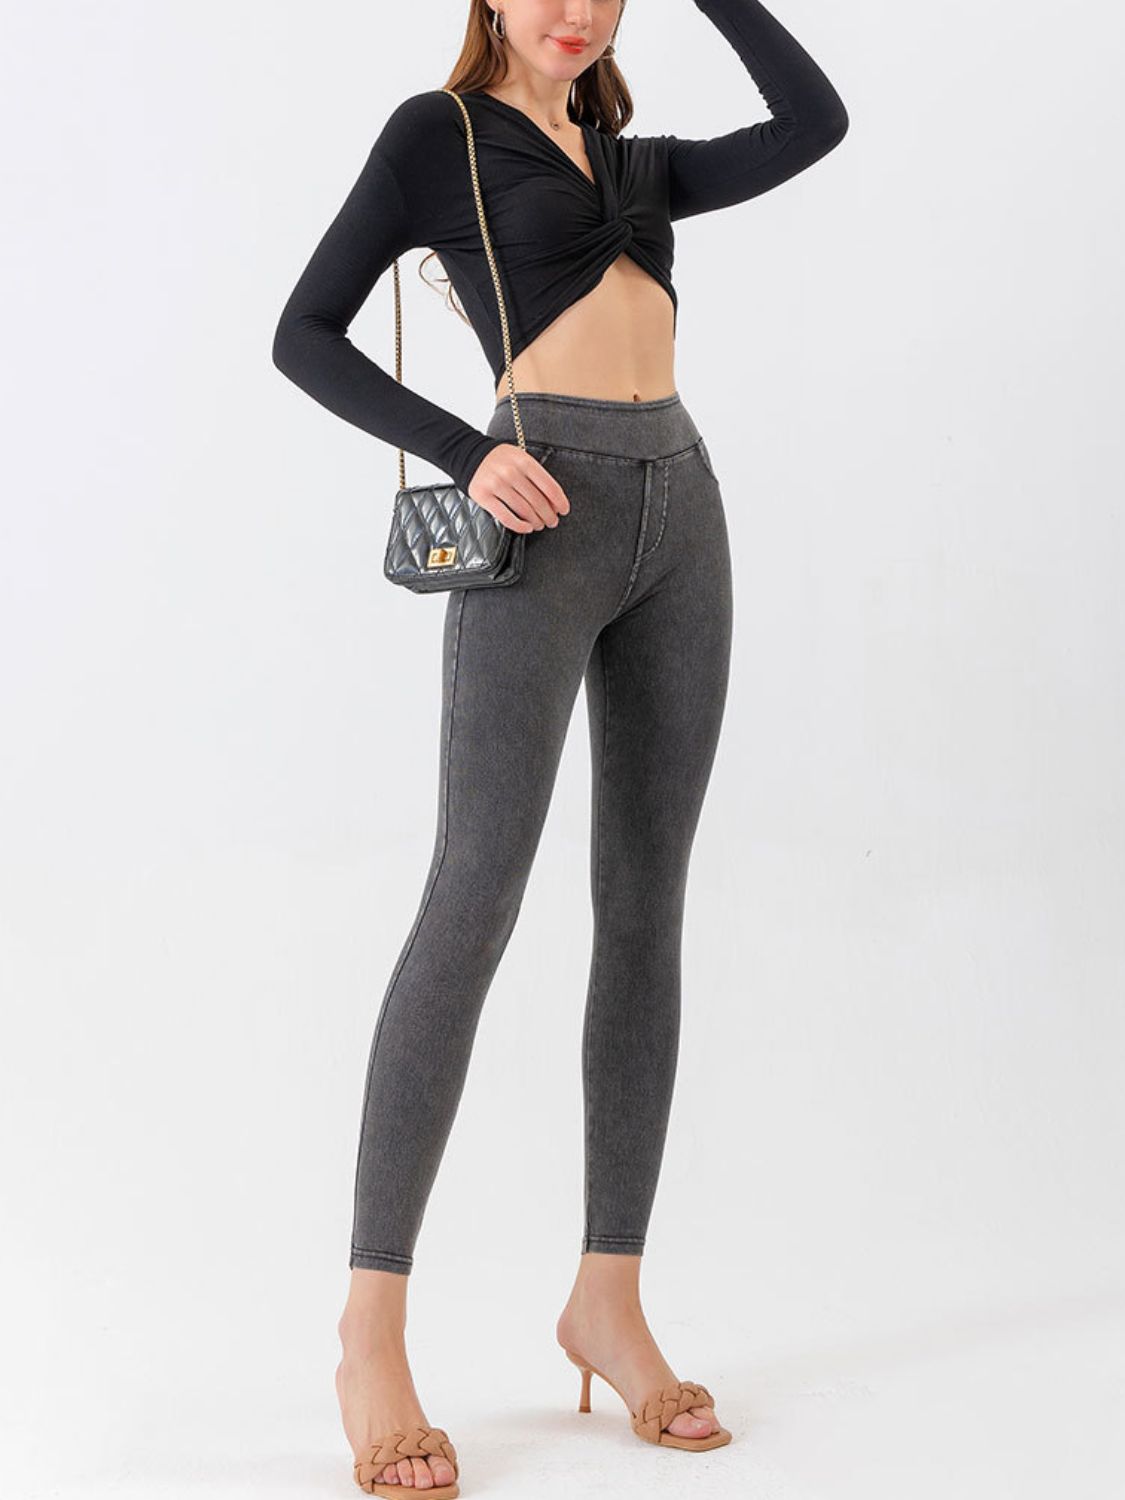 High Waist Cropped Active Leggings Print on any thing USA/STOD clothes